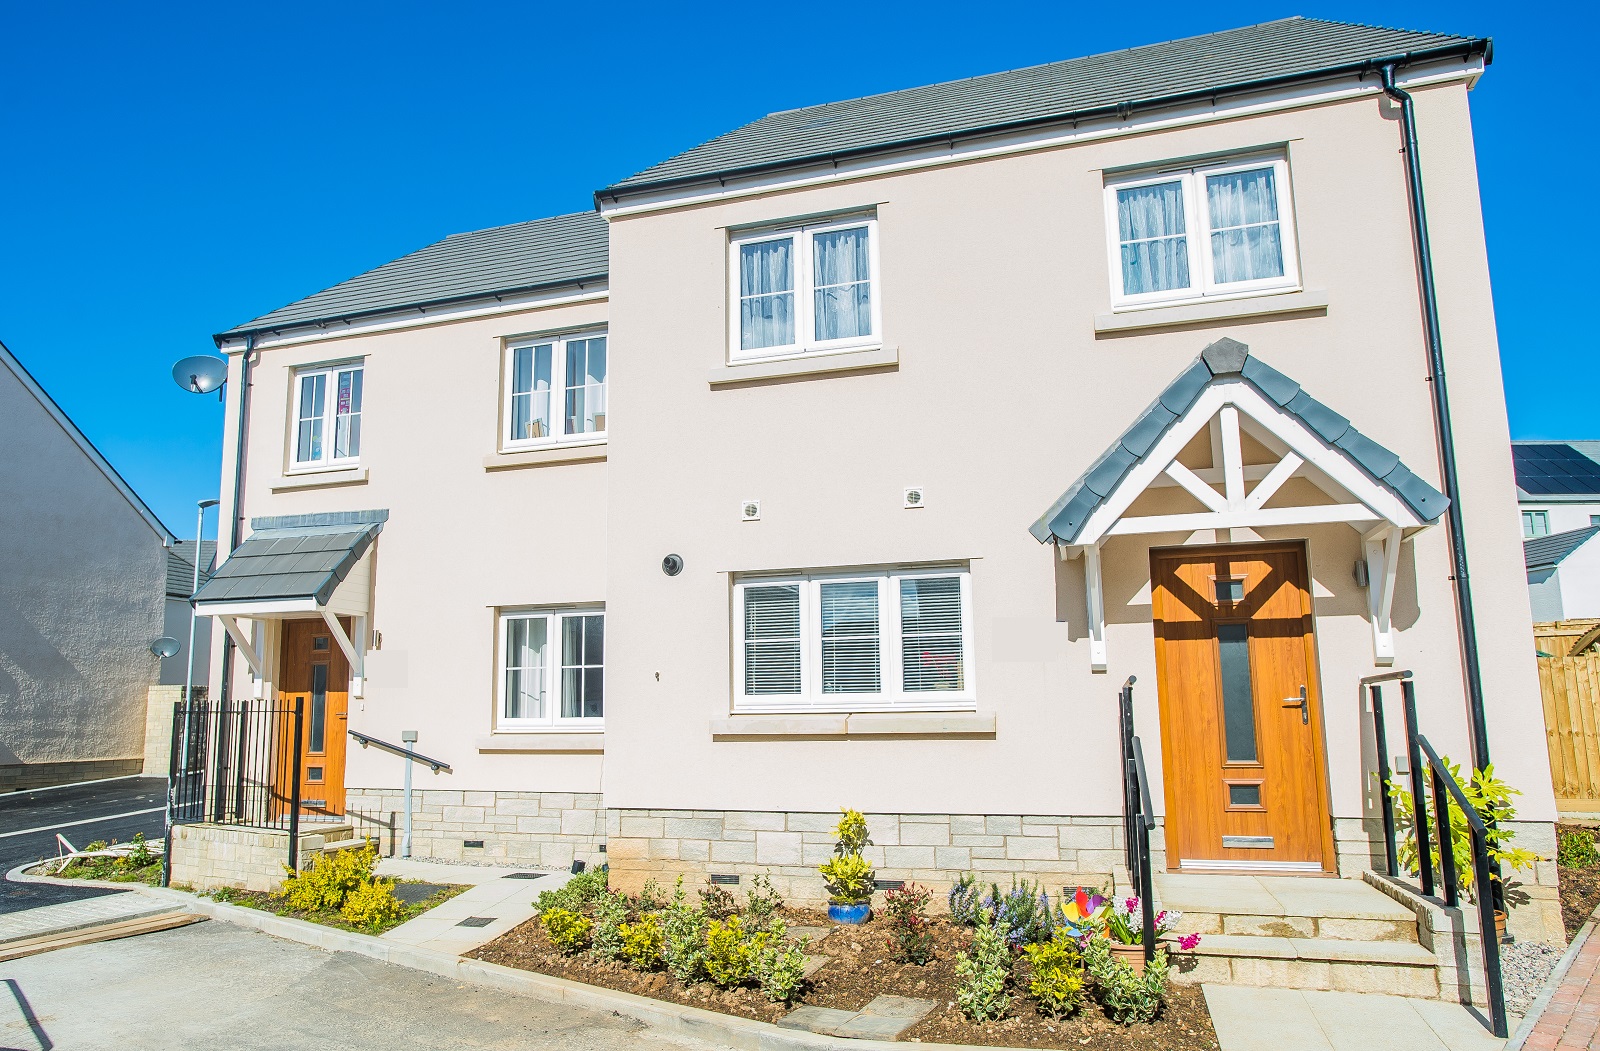 LiveWest homes in Trispen Meadows